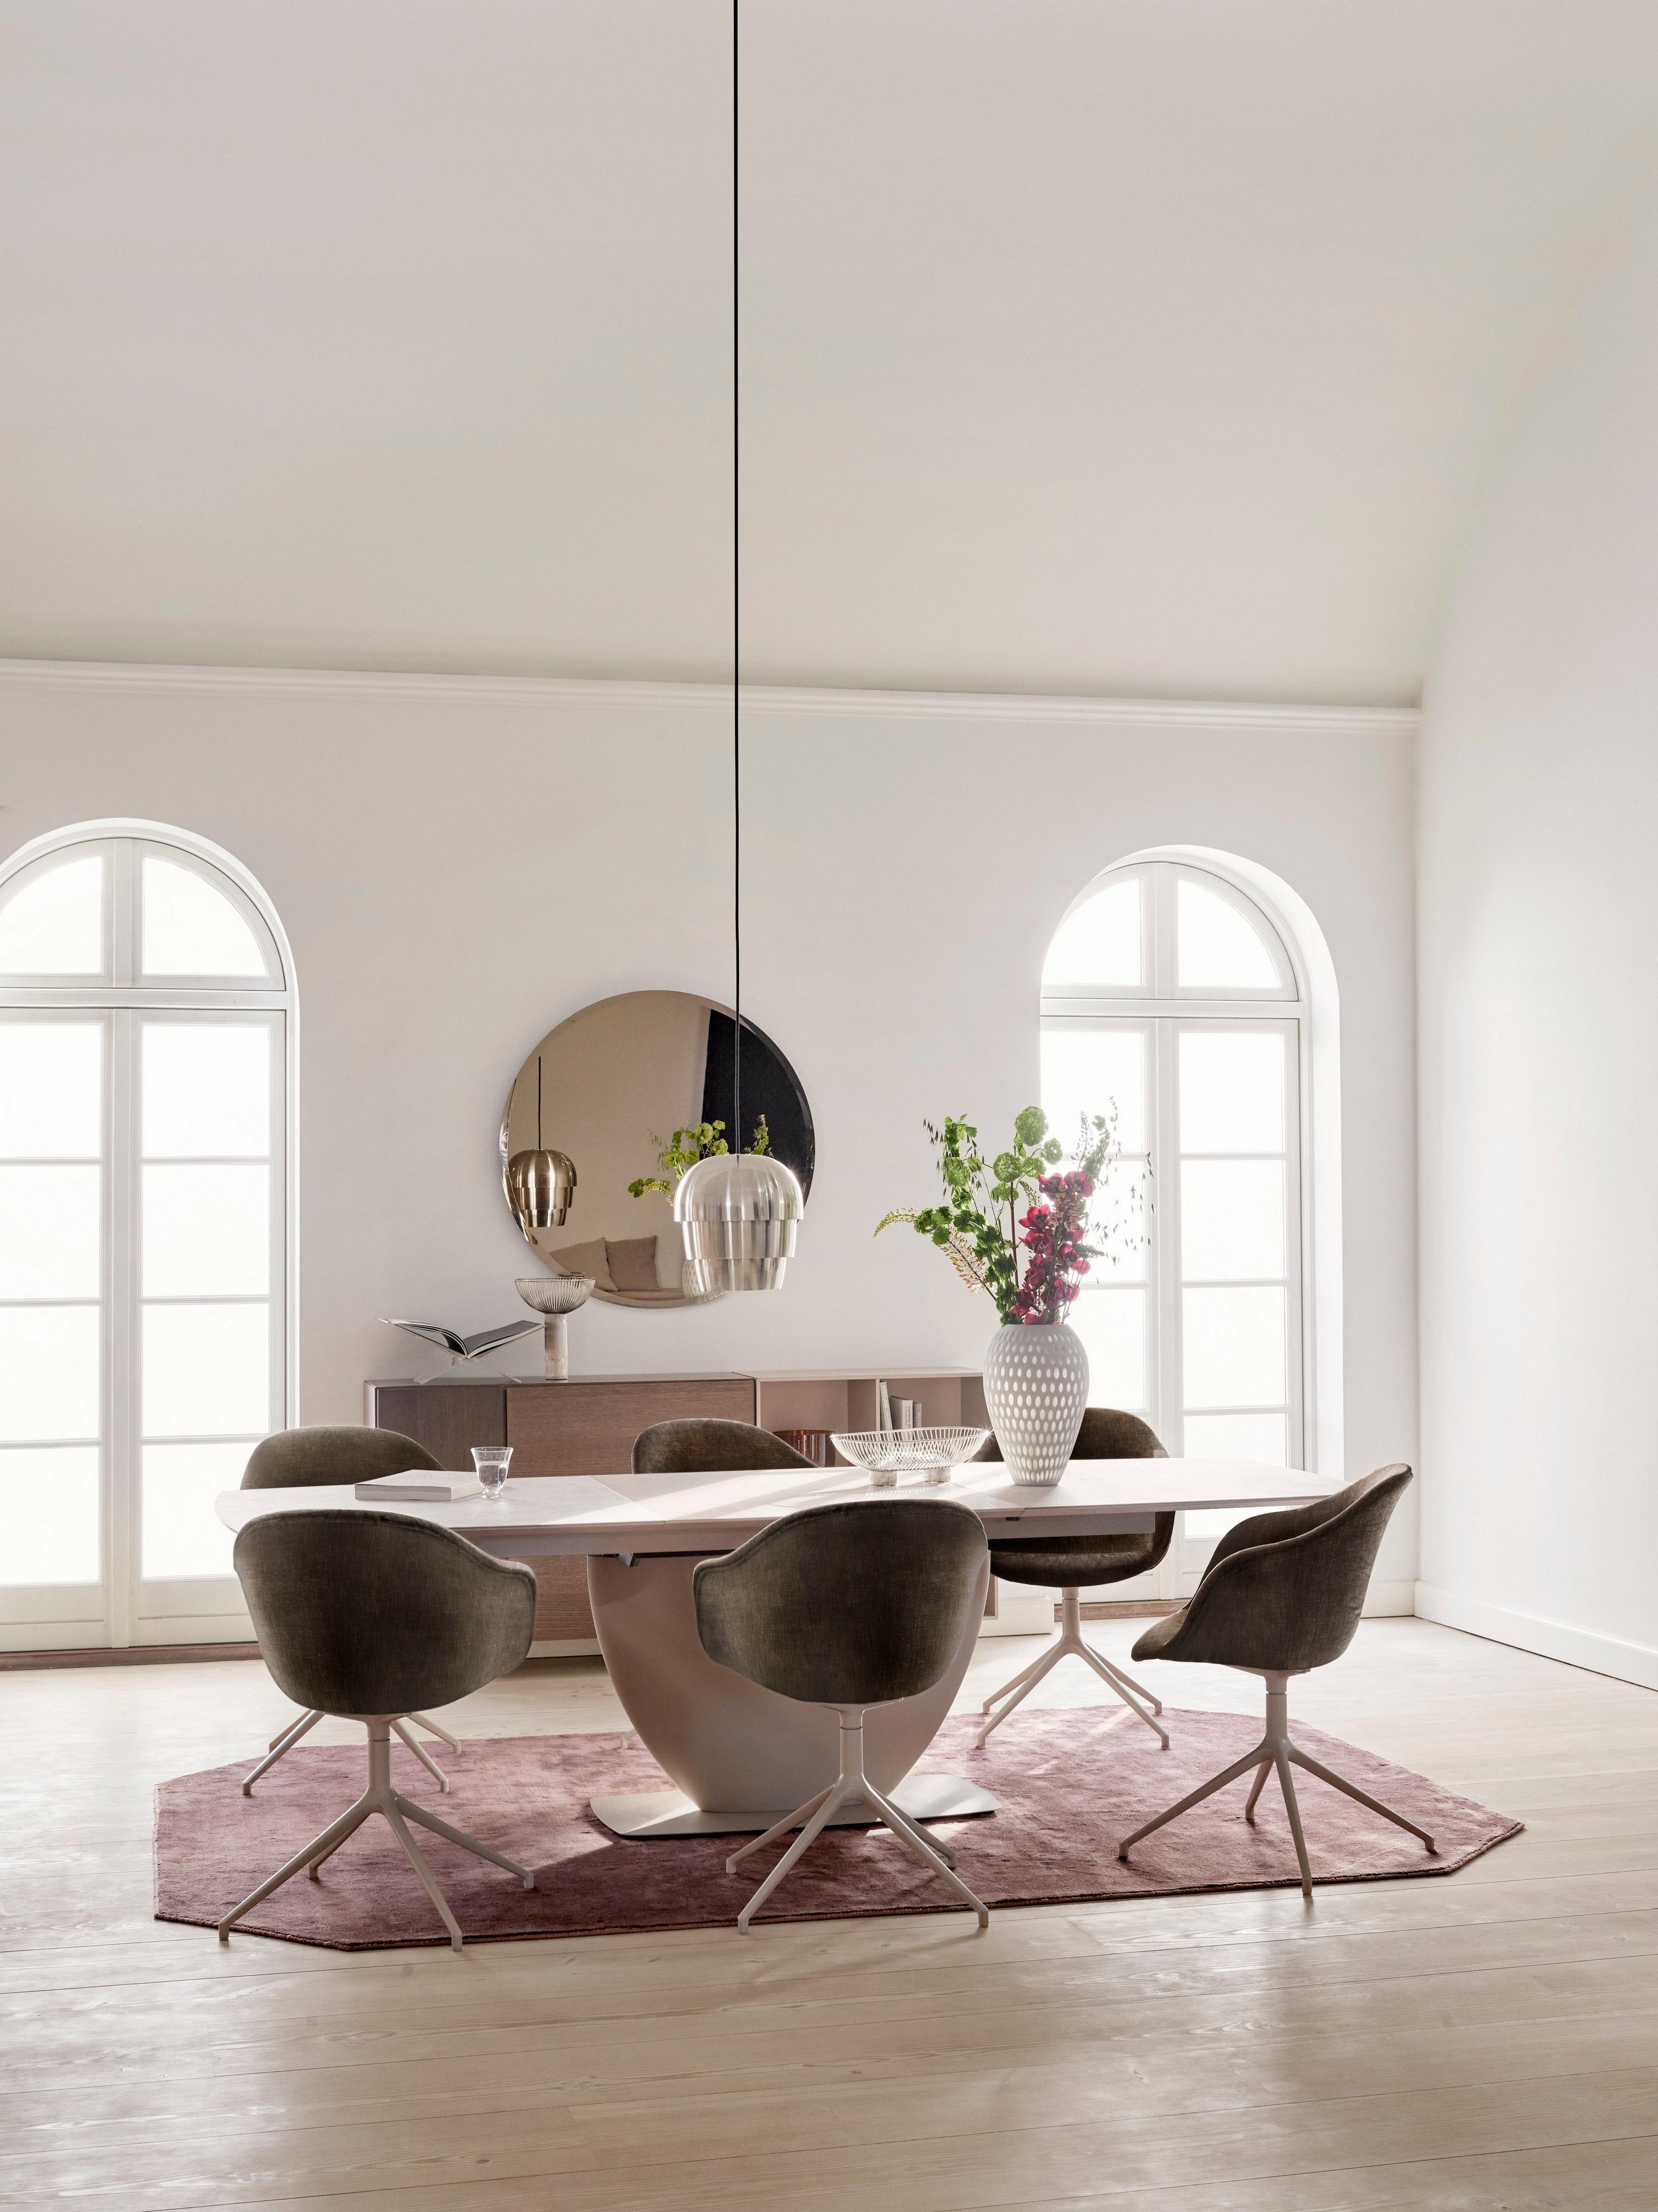 Elegant dining room with arched windows, a marble table, grey chairs, a round mirror, and floral accents.